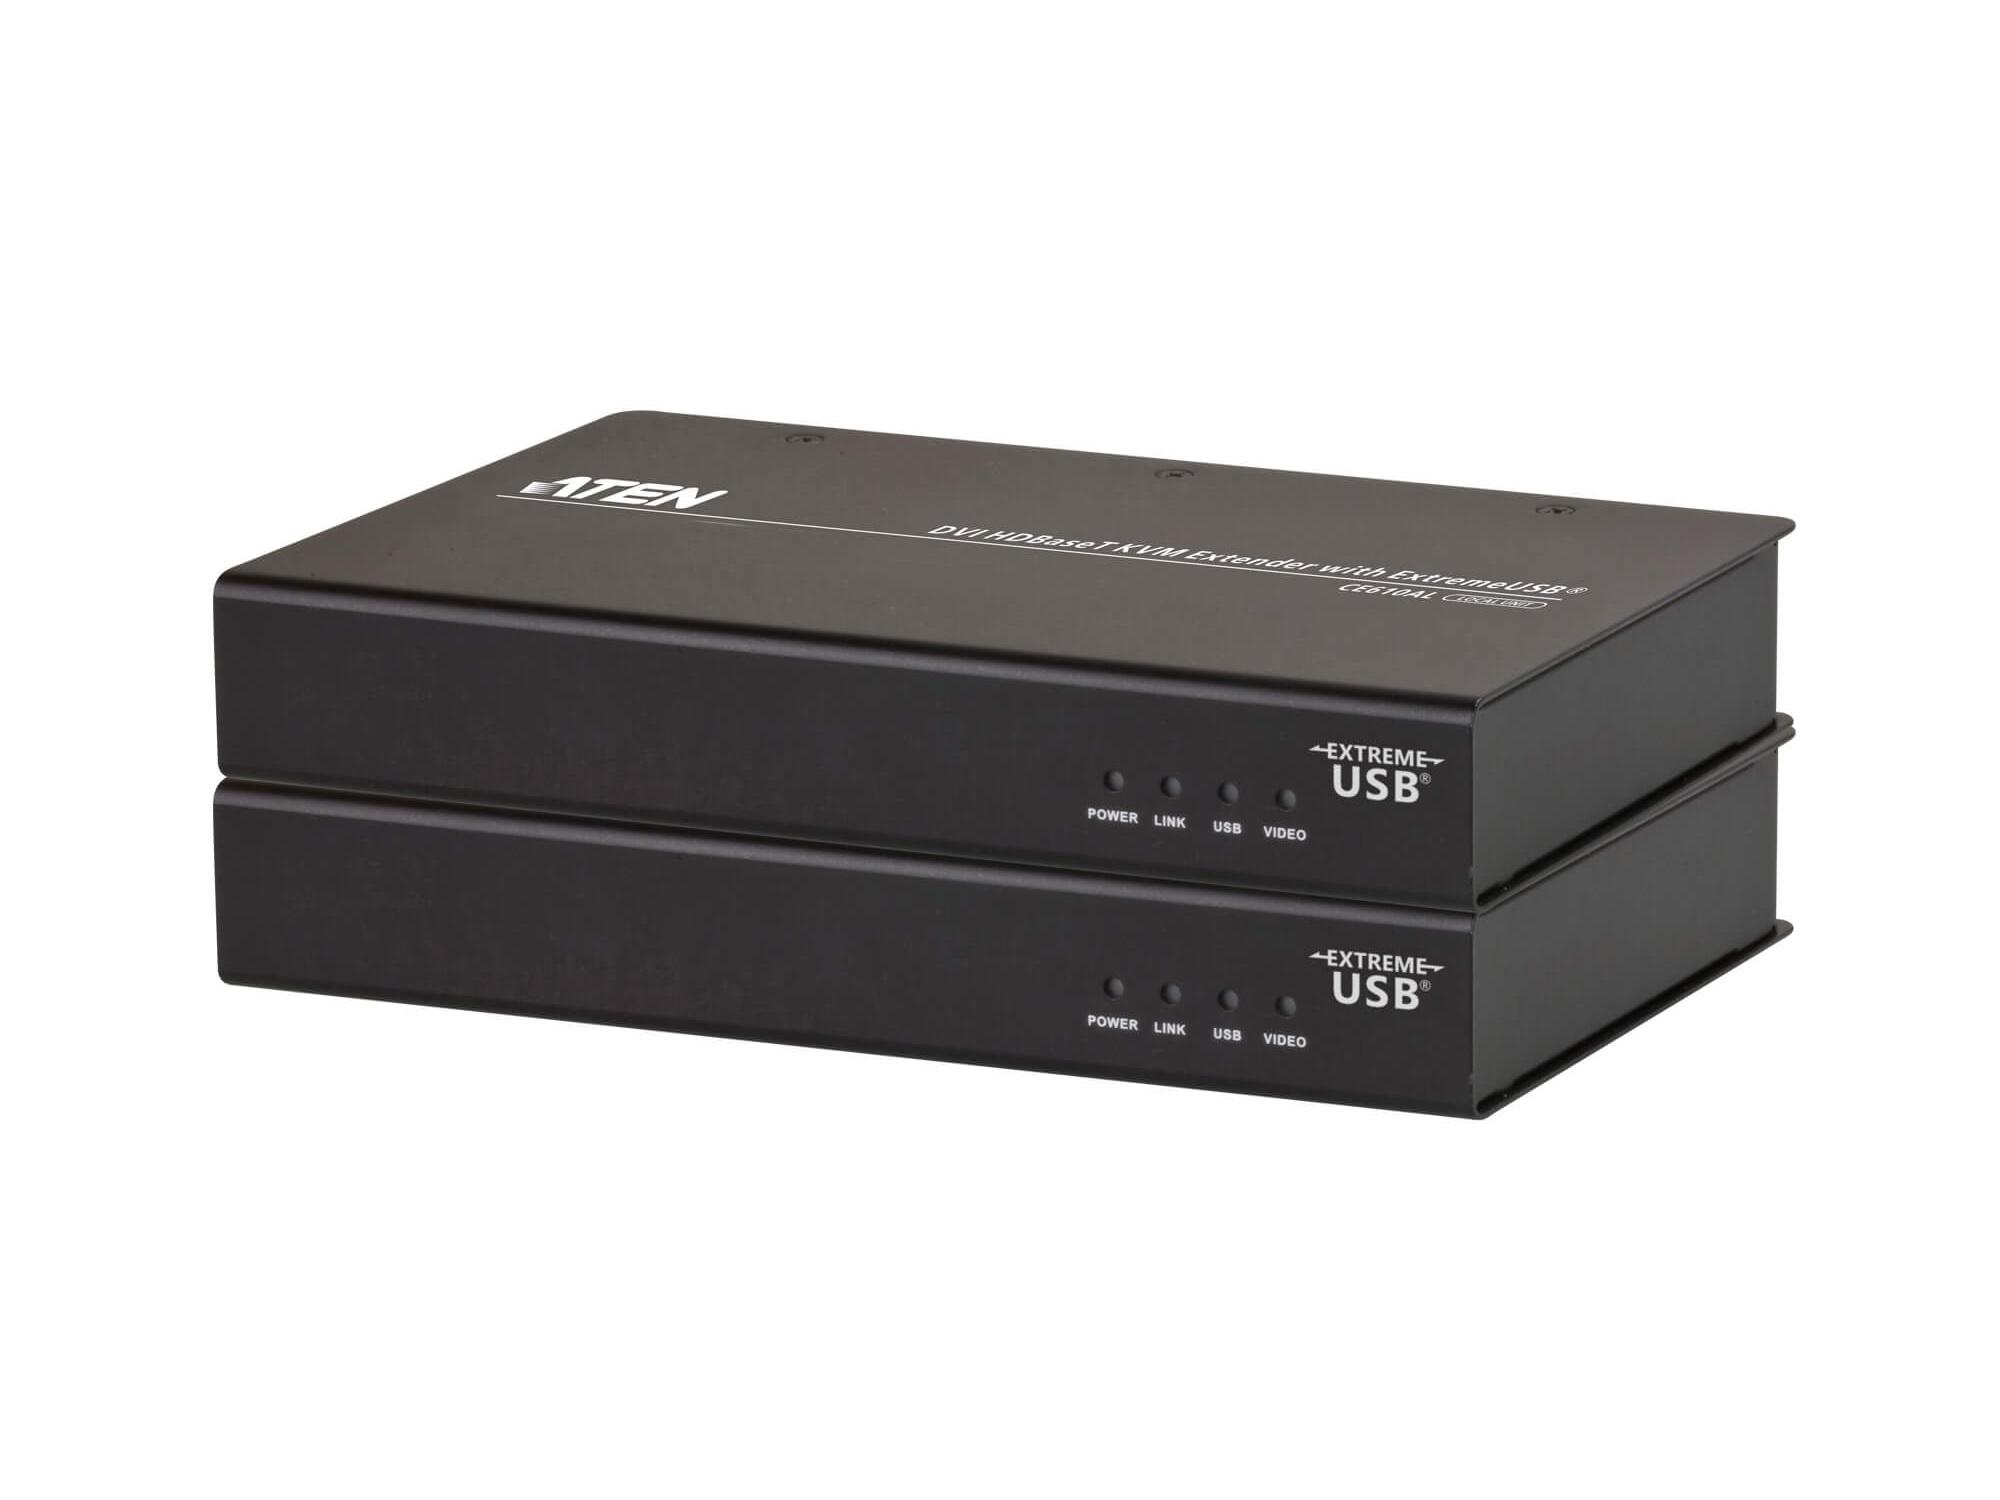 CE610A DVI HDBaseT KVM Extender with ExtremeUSB by Aten